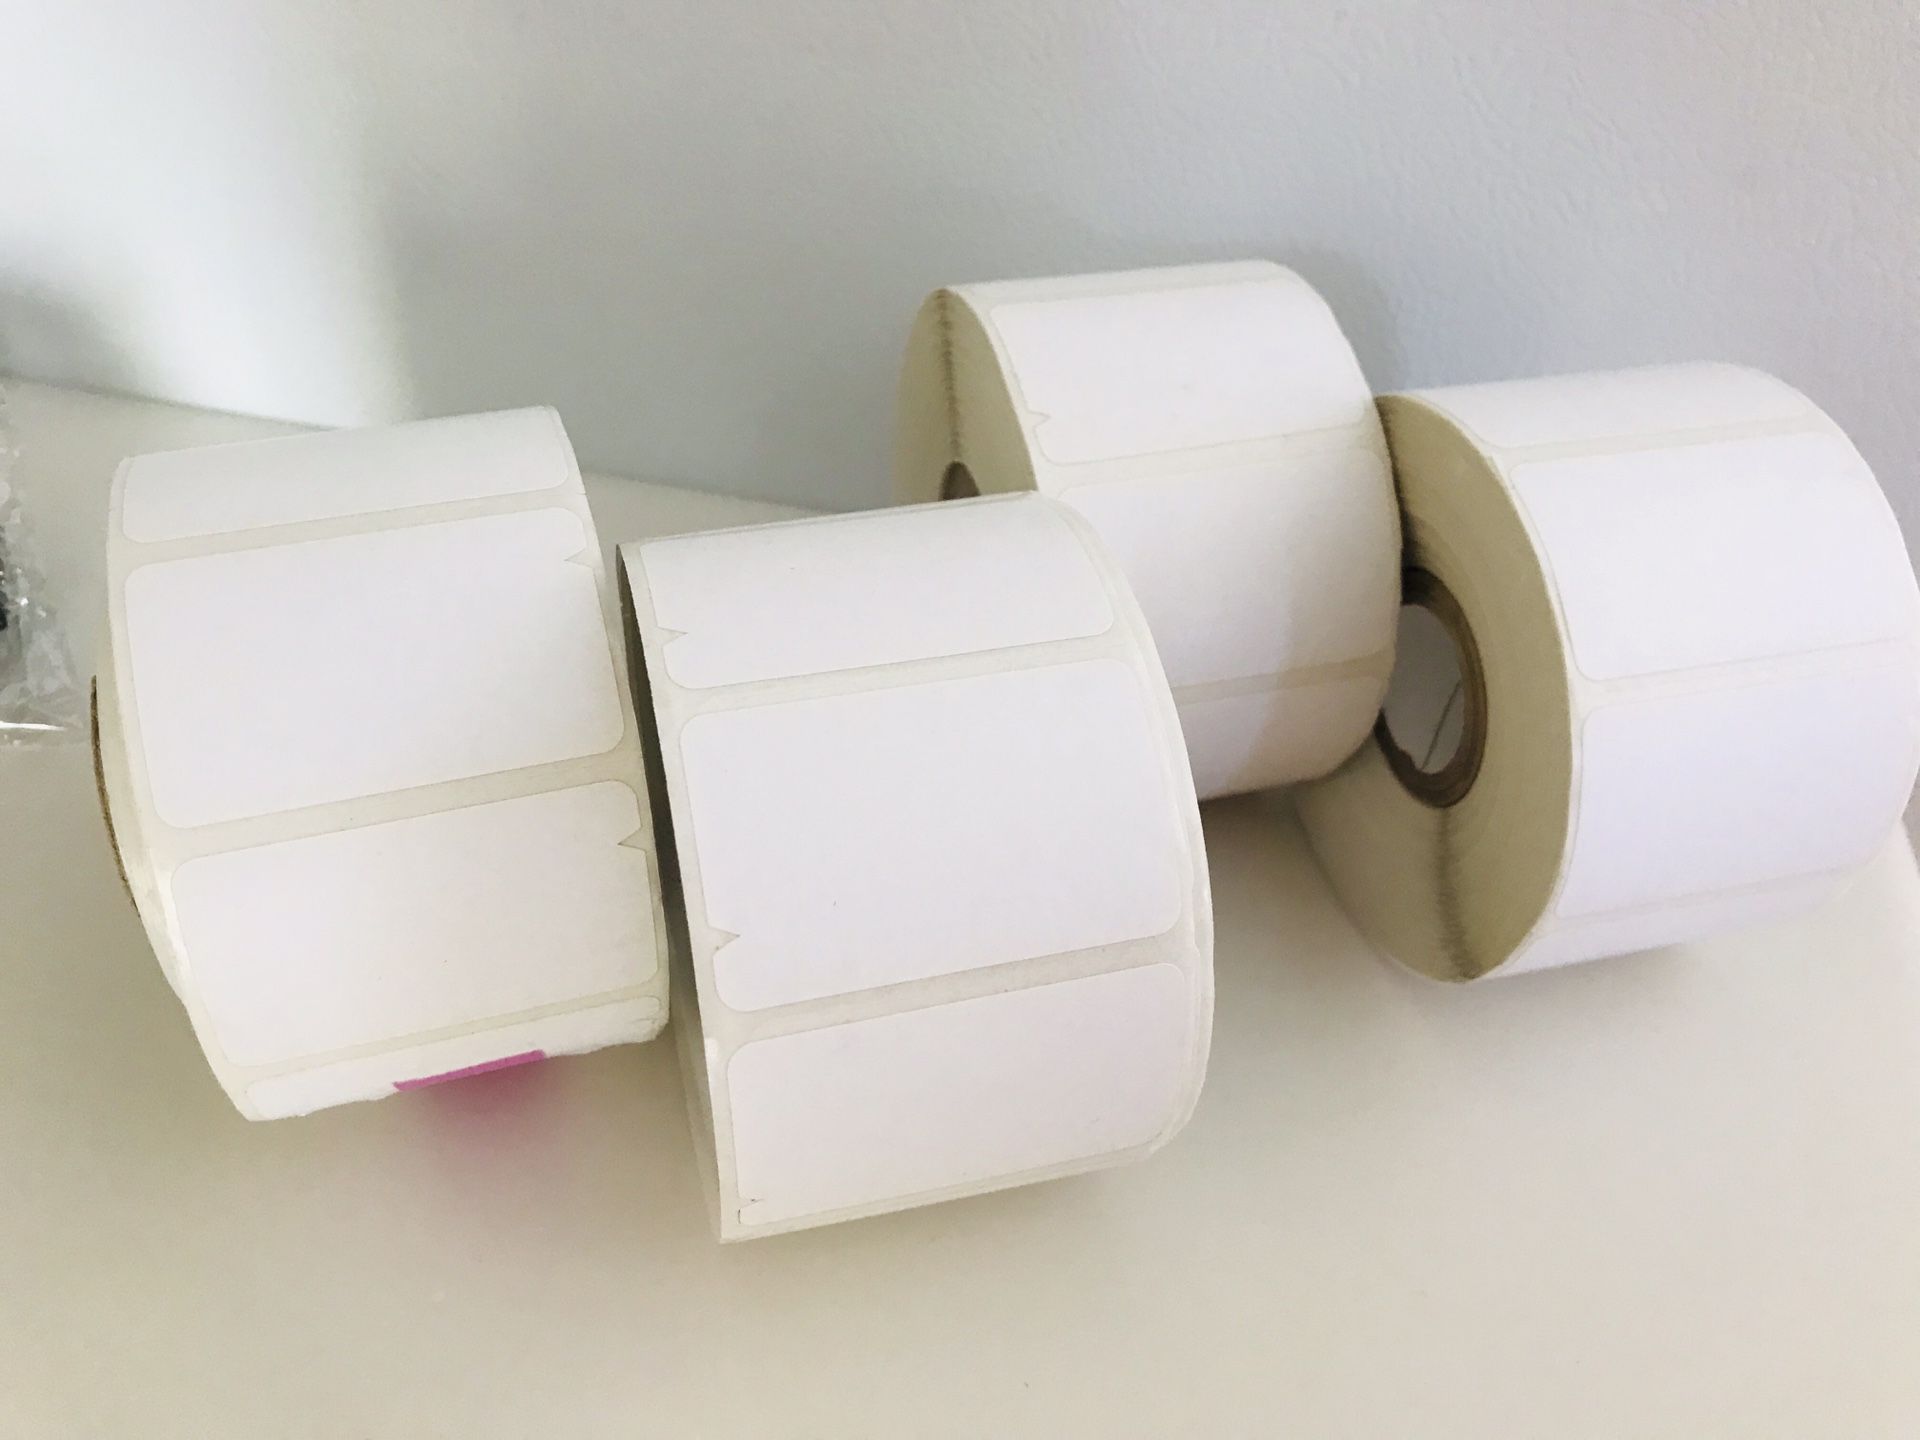 Rolls of Blank Labels $16 for 4 rolls